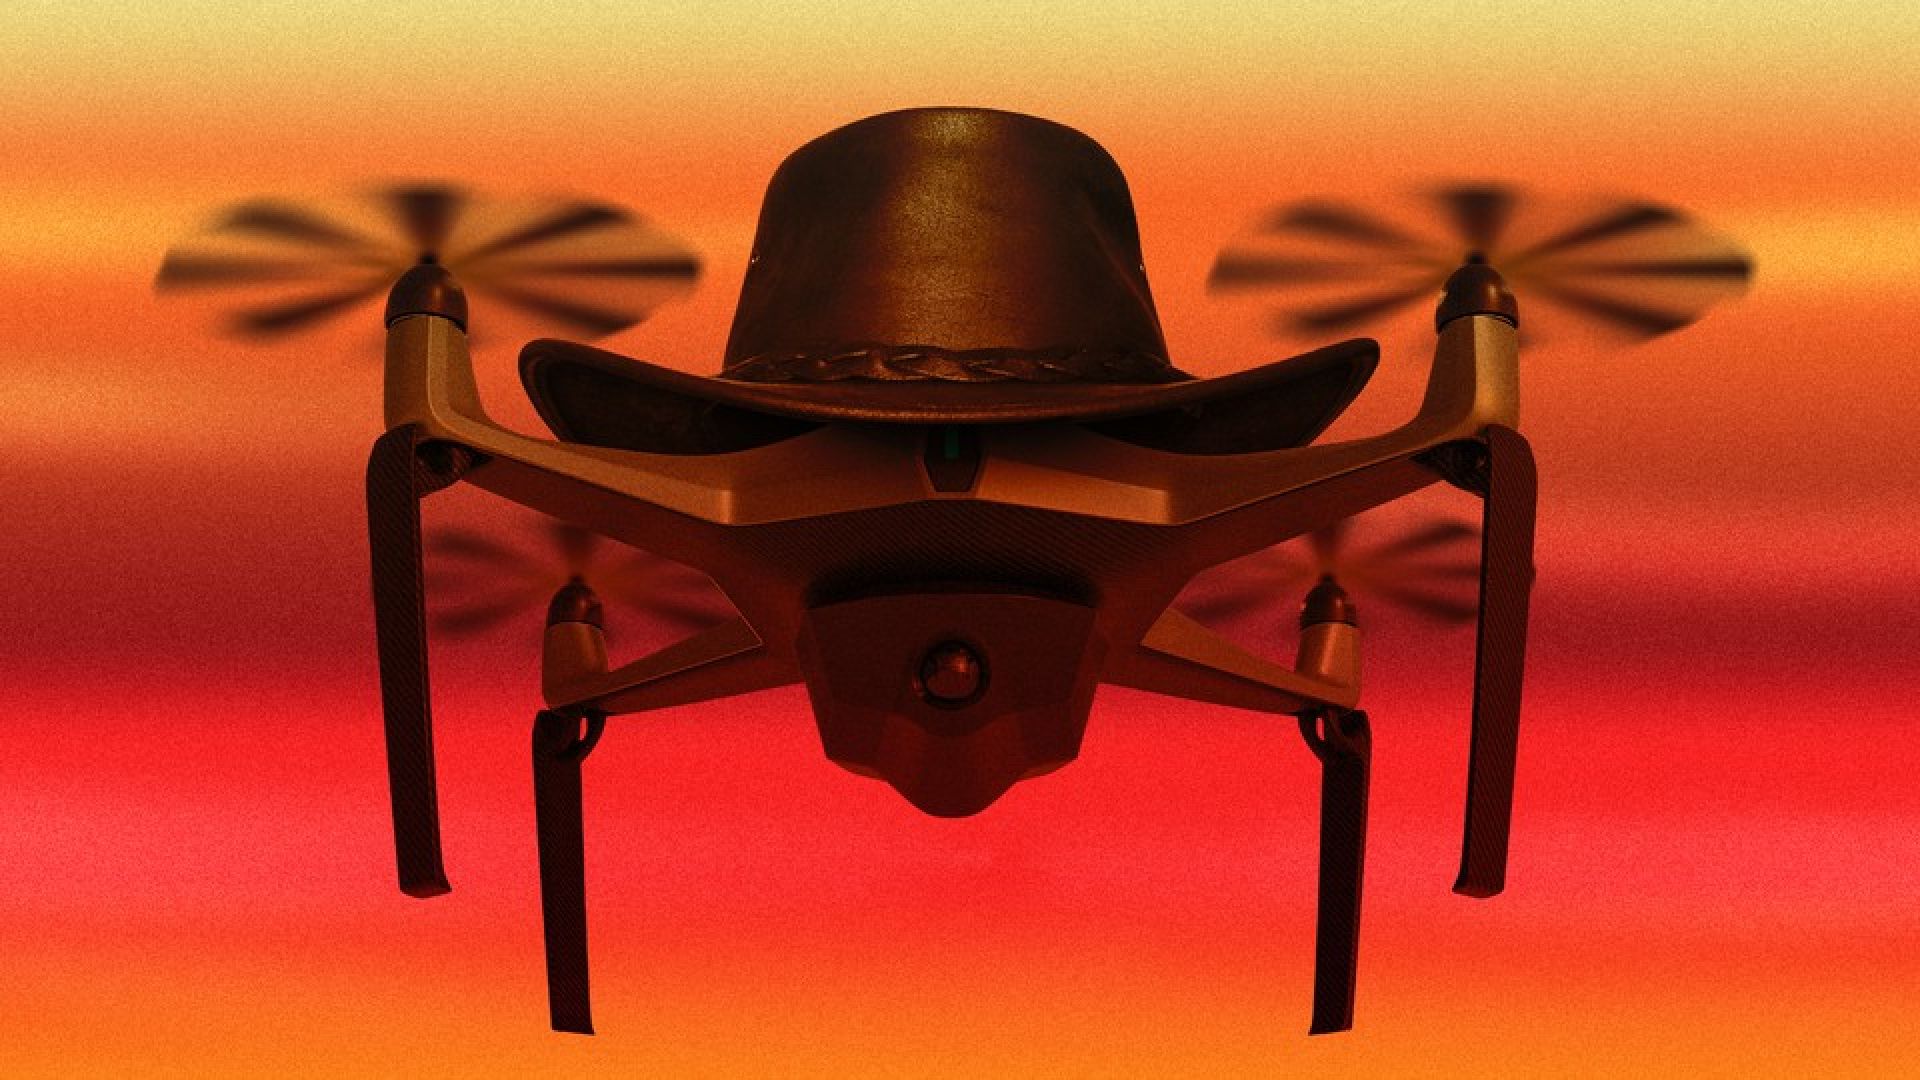 Drones Could Unite Ranchers and Conservationists